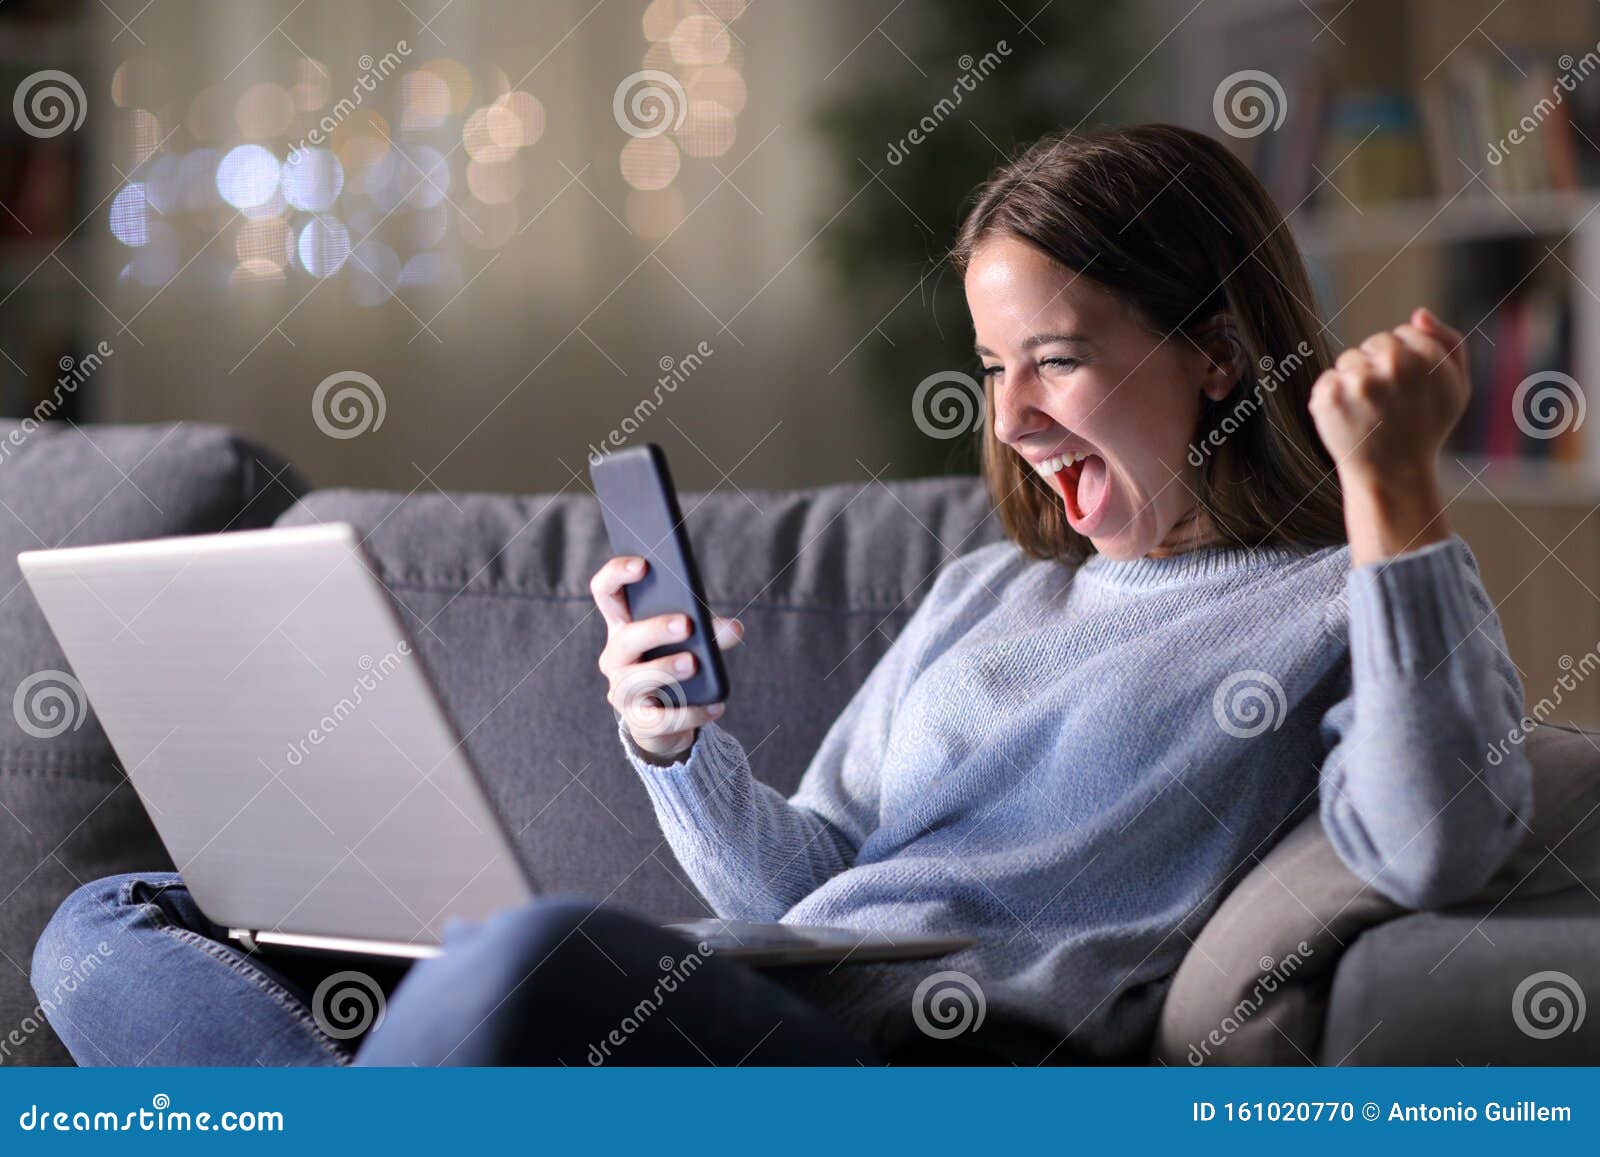 excited woman using phone and laptop in the night